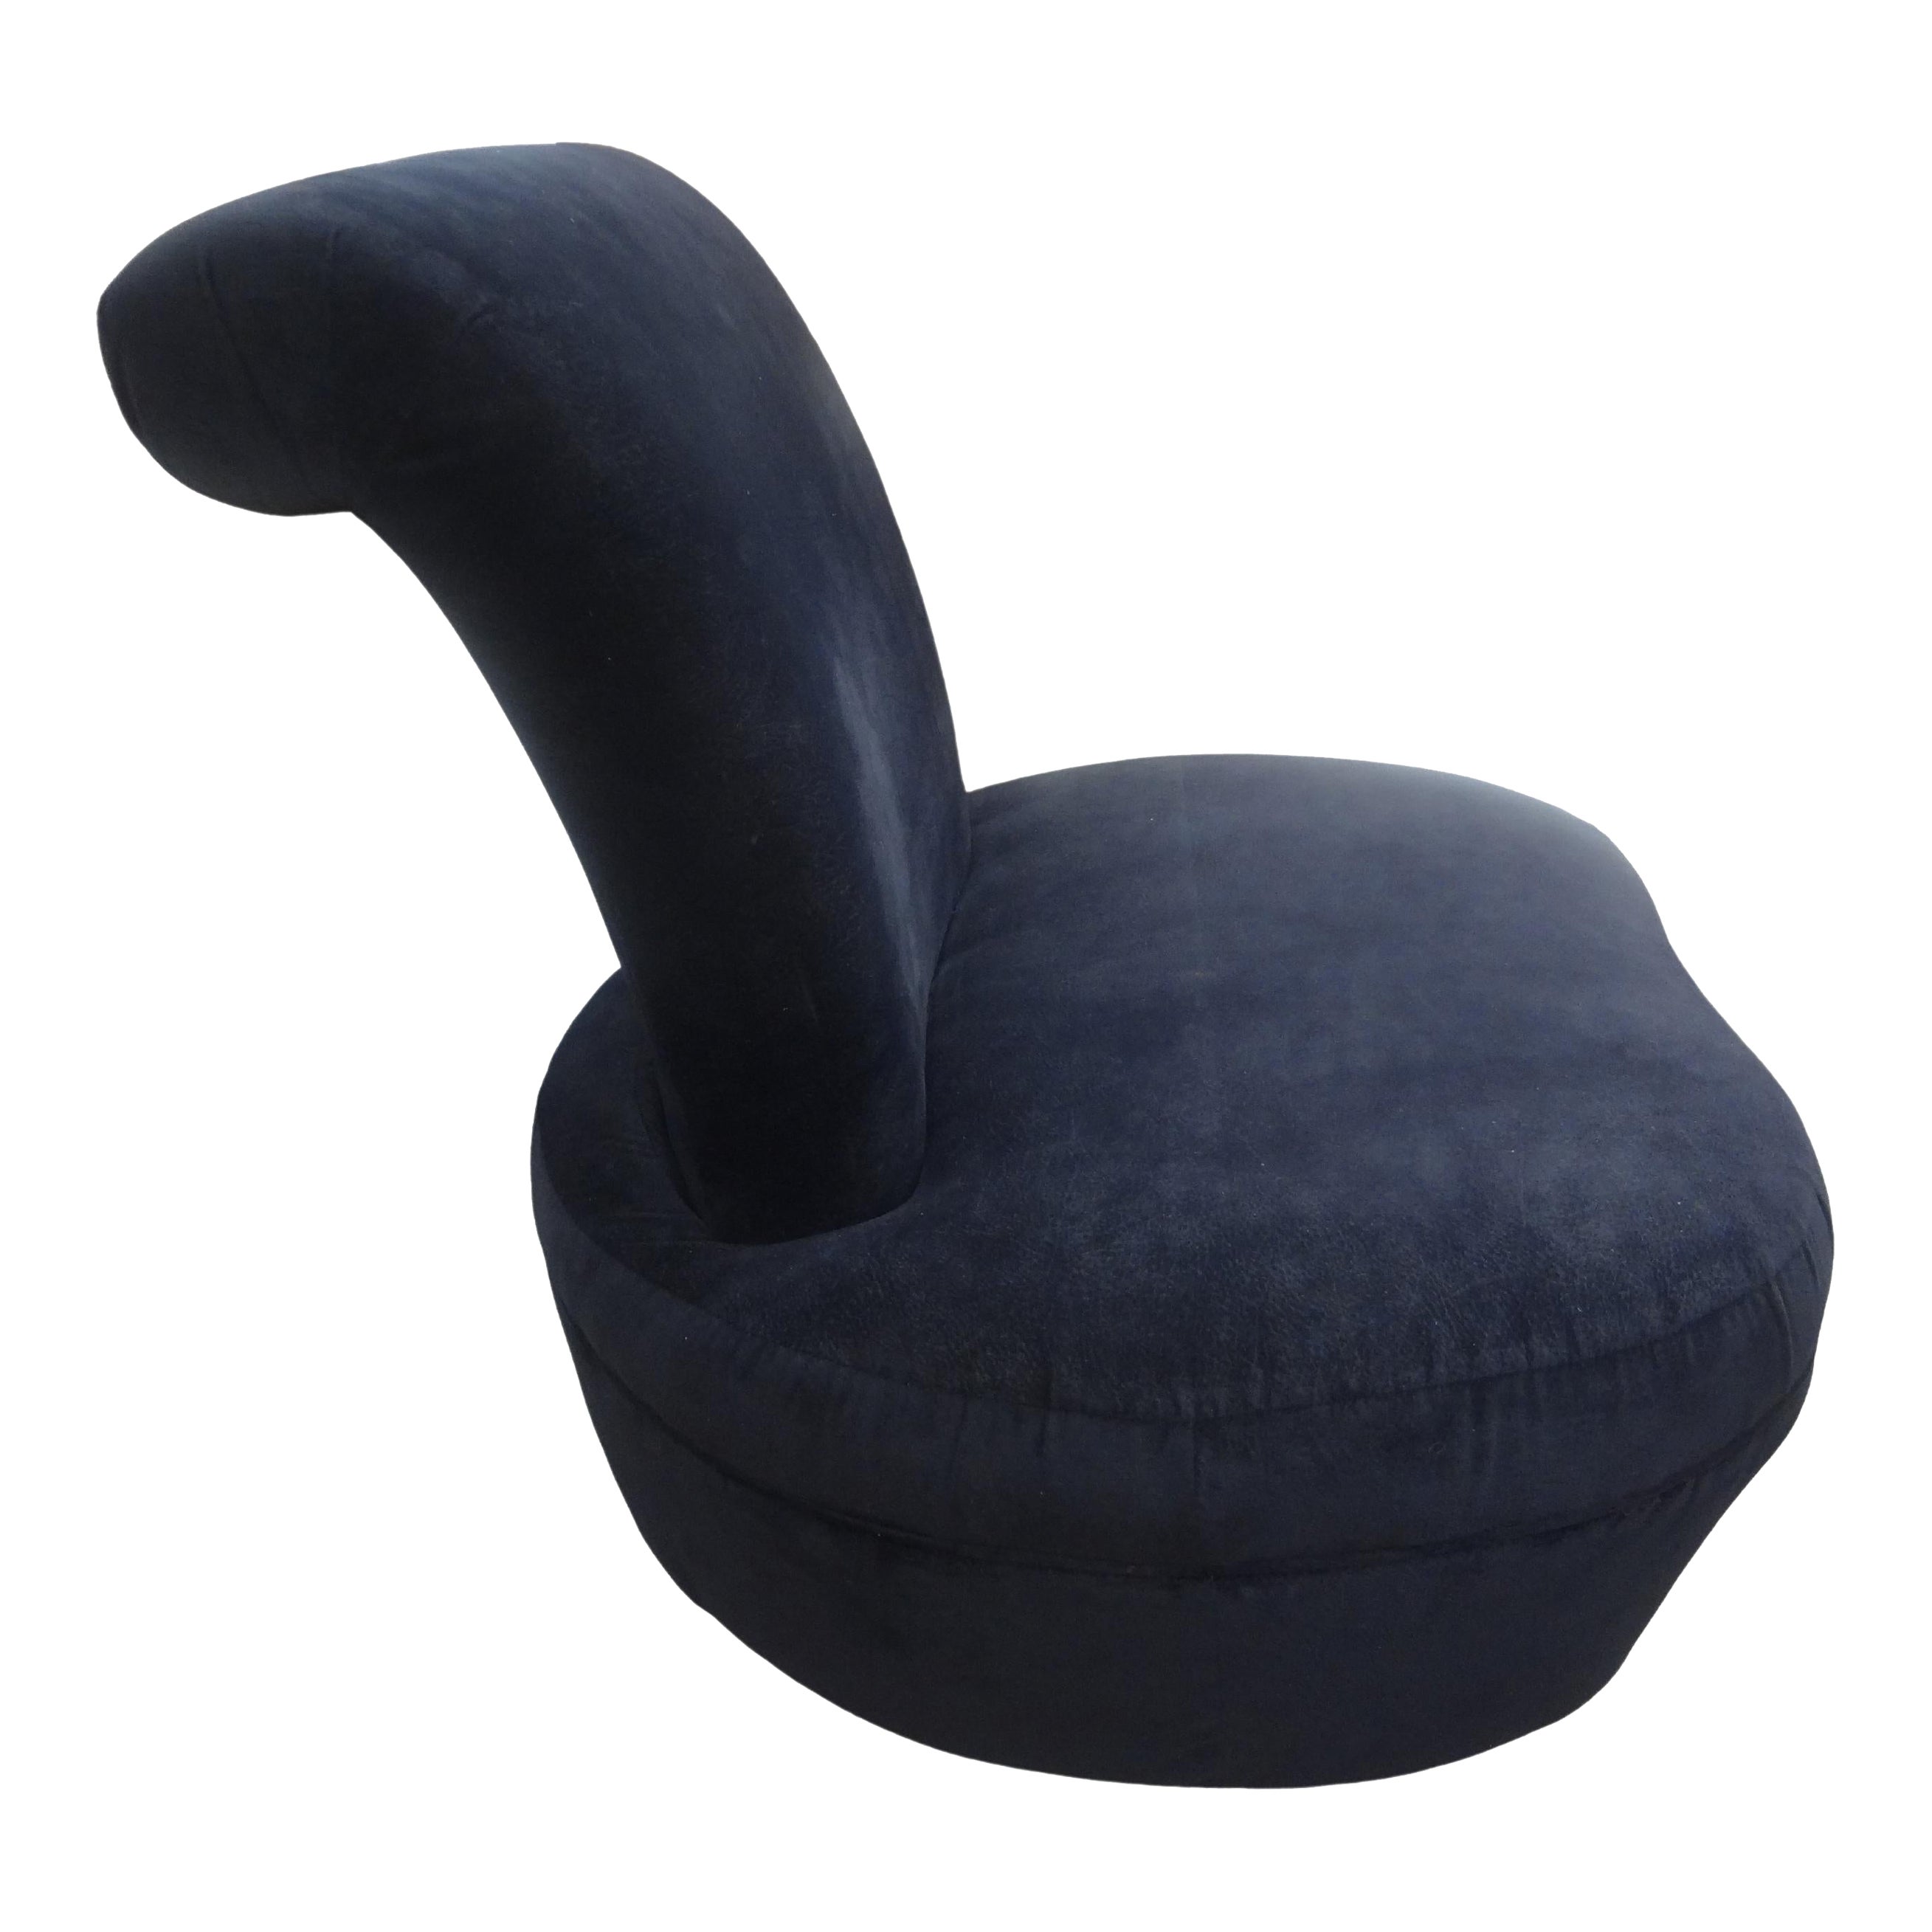 Postmodern Directional Furniture Style Swivel Chair For Sale